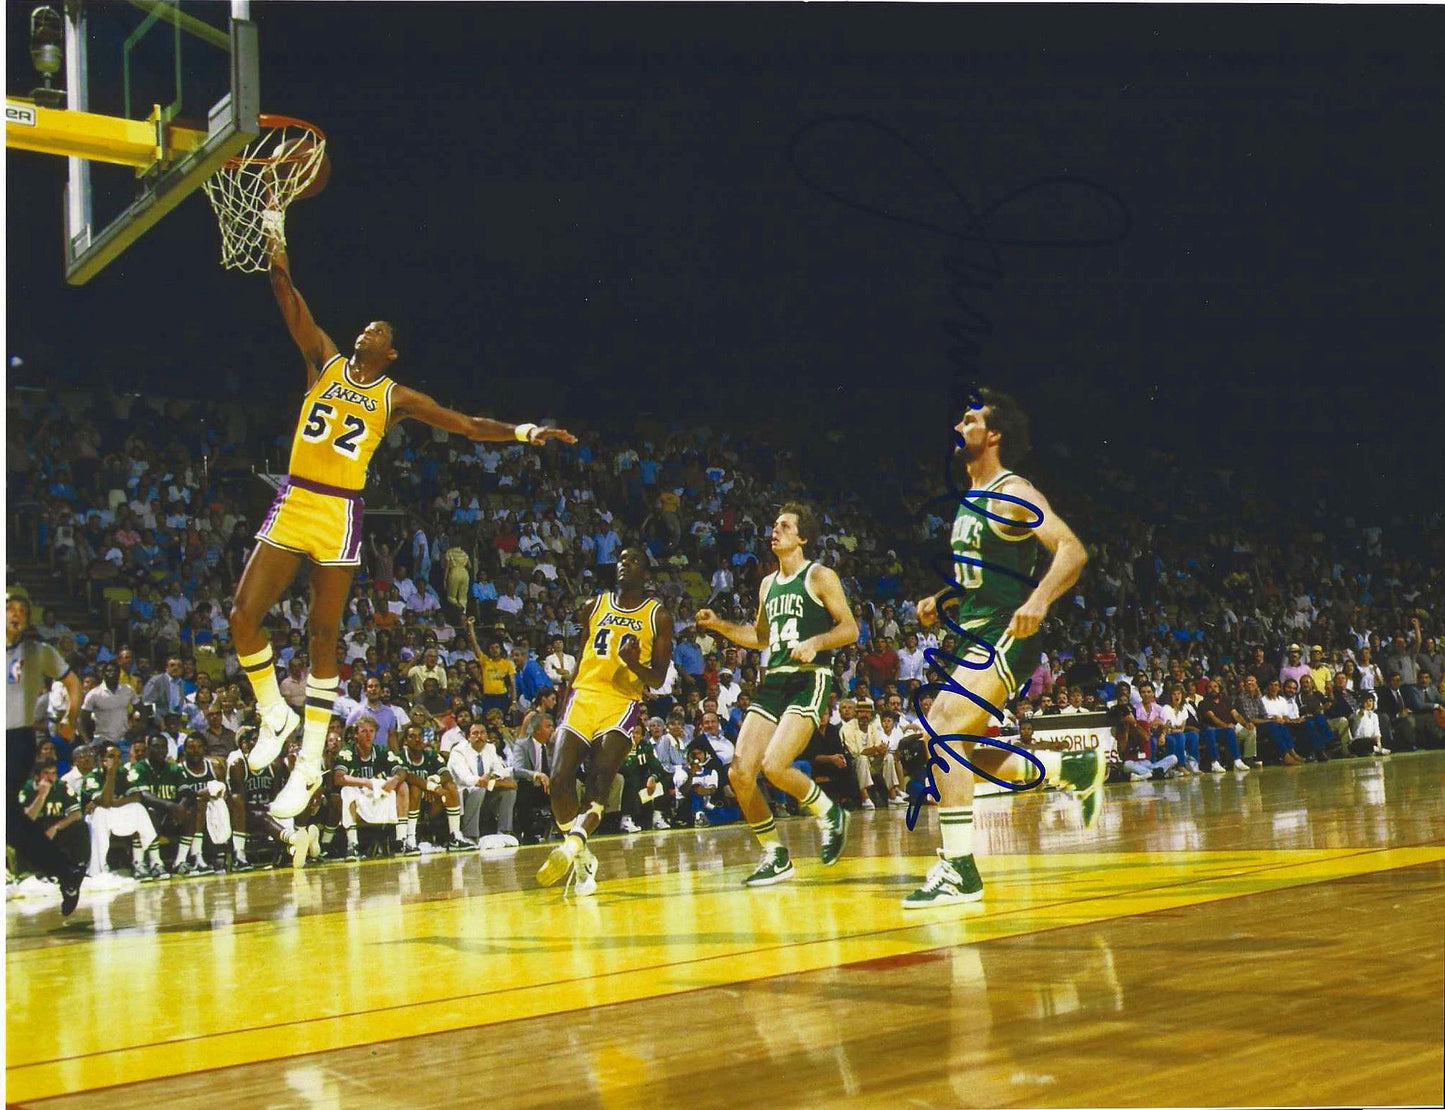 Jamaal Wilkes Autographed Signed "LAKERS" 8x10 photo Elite Promotions & Graphz Authenticatio